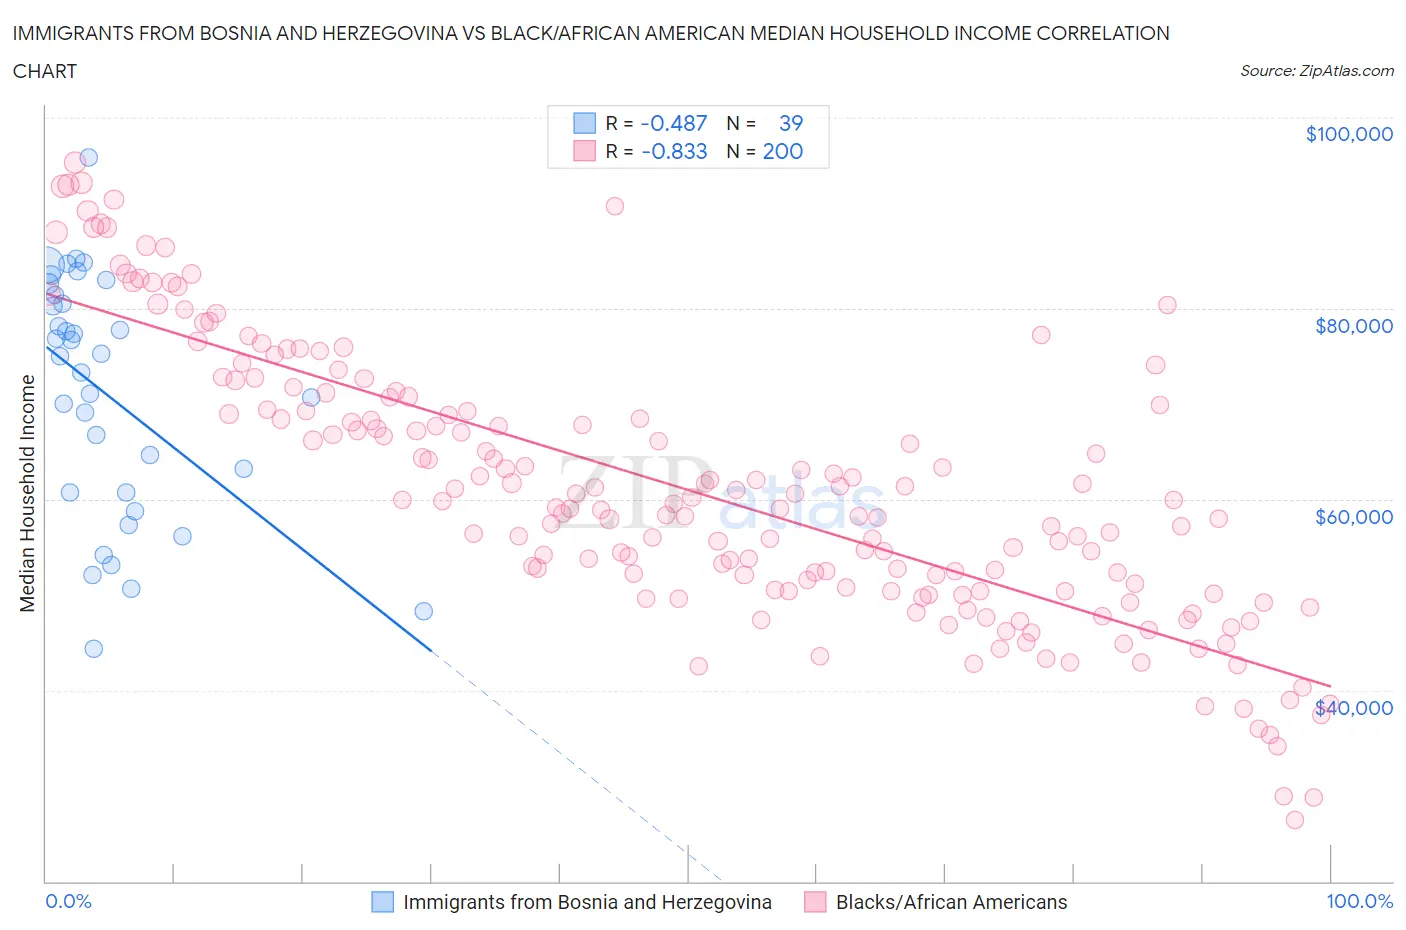 Immigrants from Bosnia and Herzegovina vs Black/African American Median Household Income